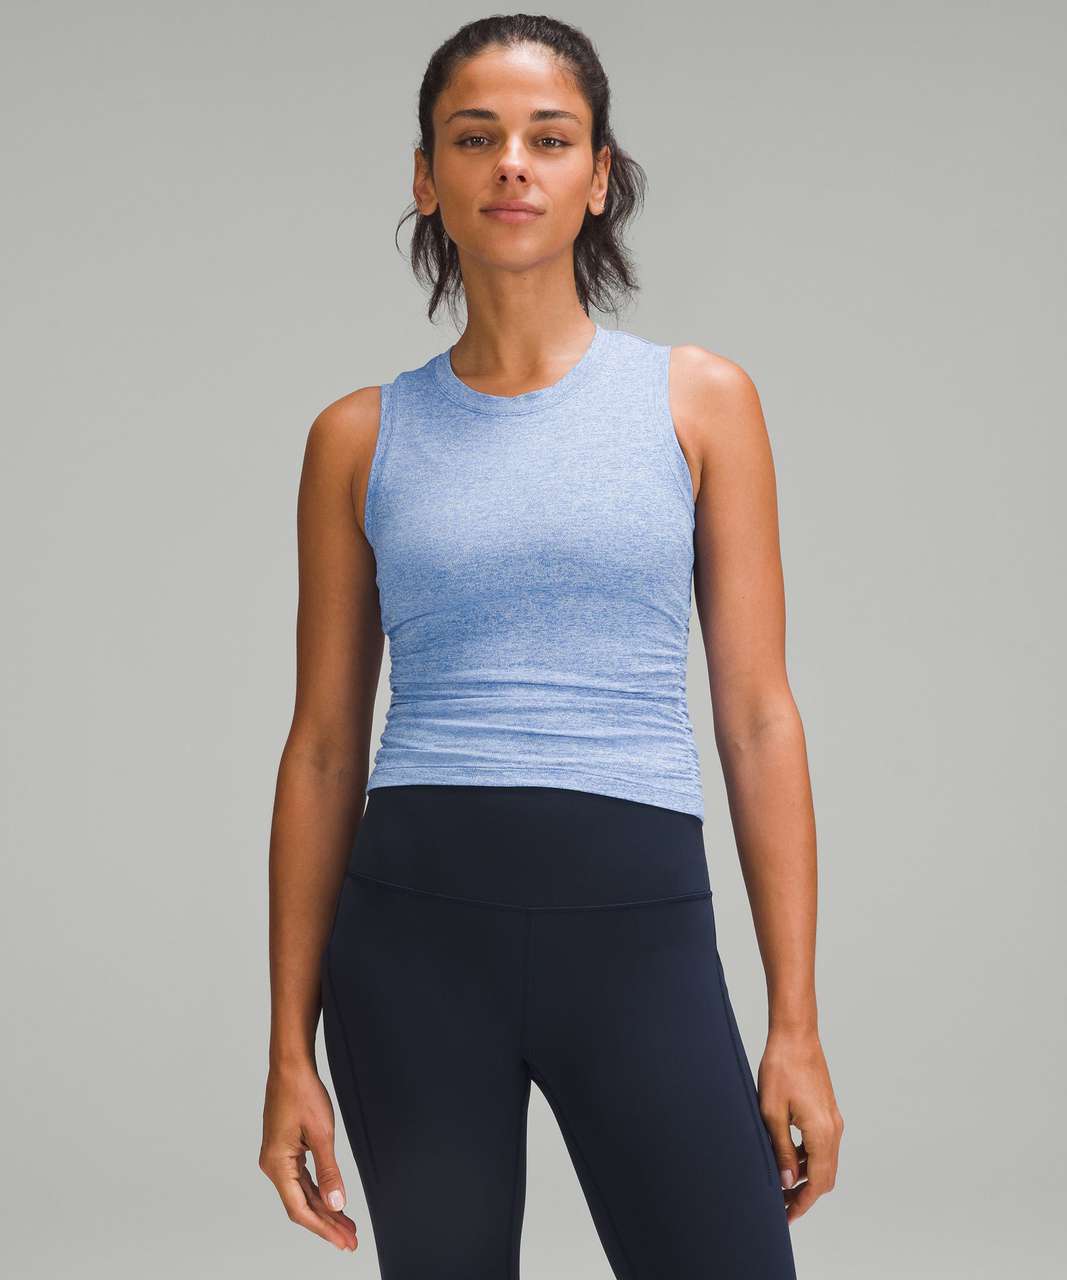 Lululemon License to Train Tight-Fit Tank Top - Heathered Pipe Dream Blue